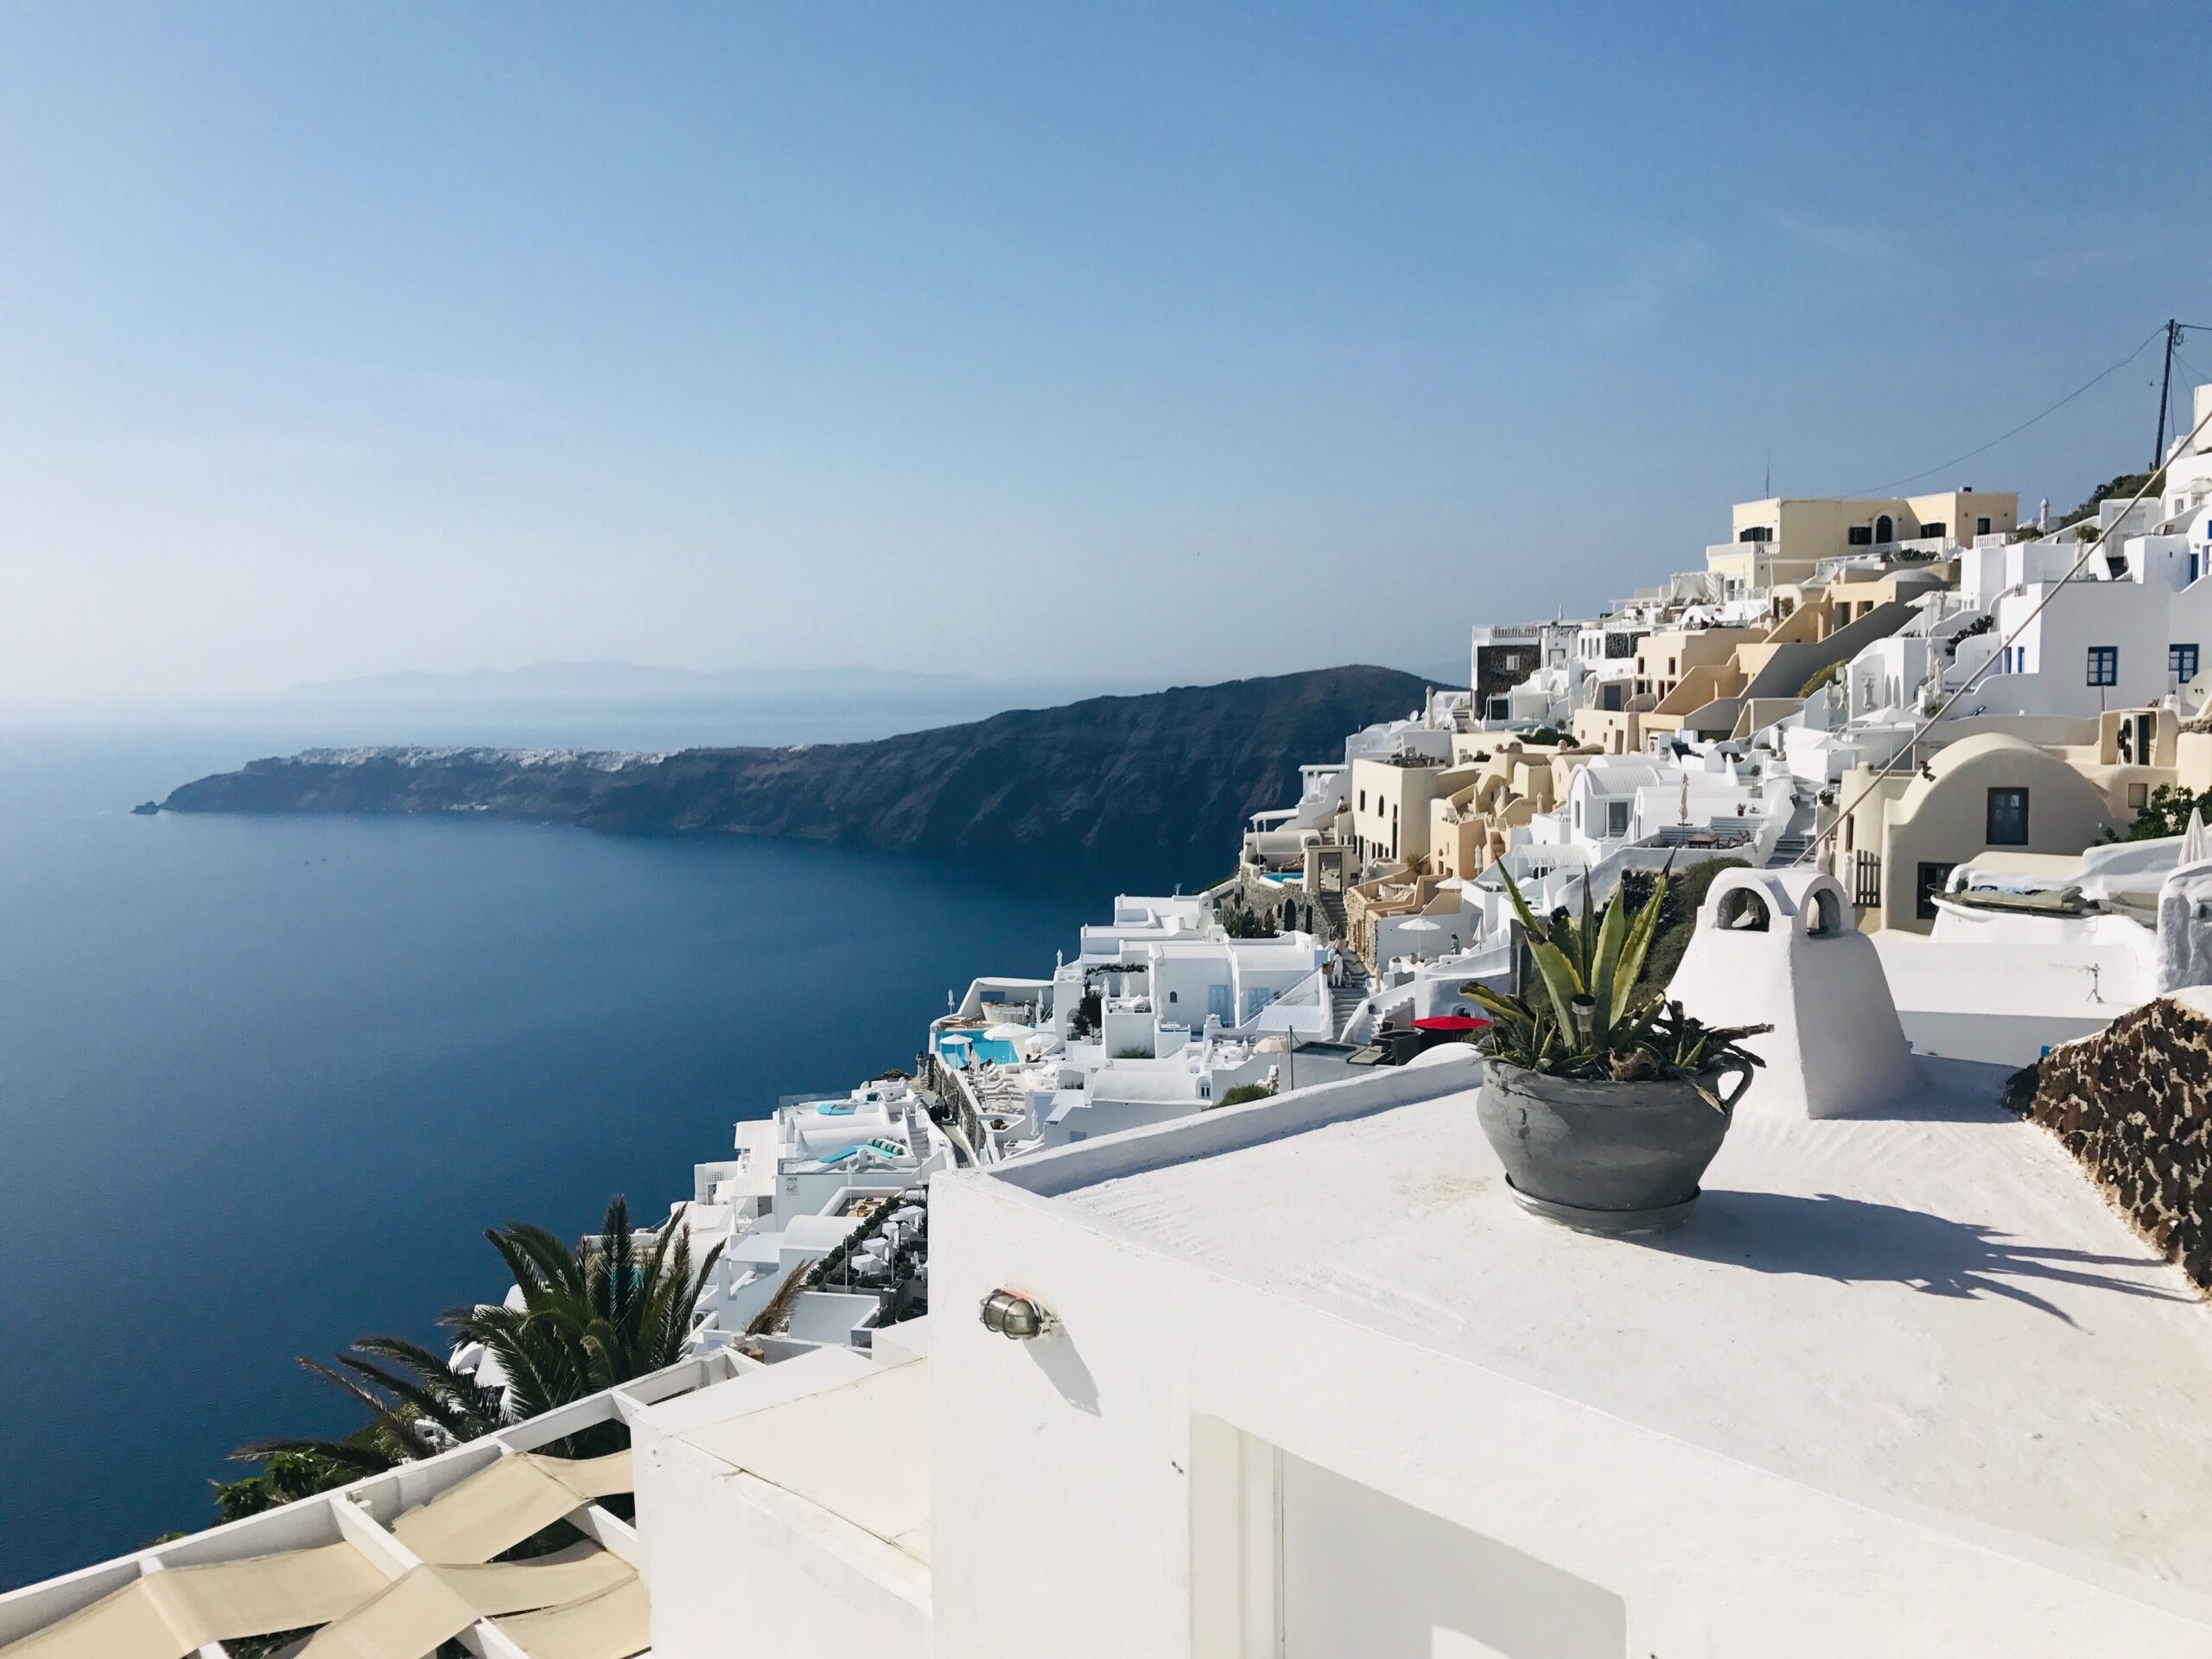 Santorini, white reflective surface help to cool down the city.